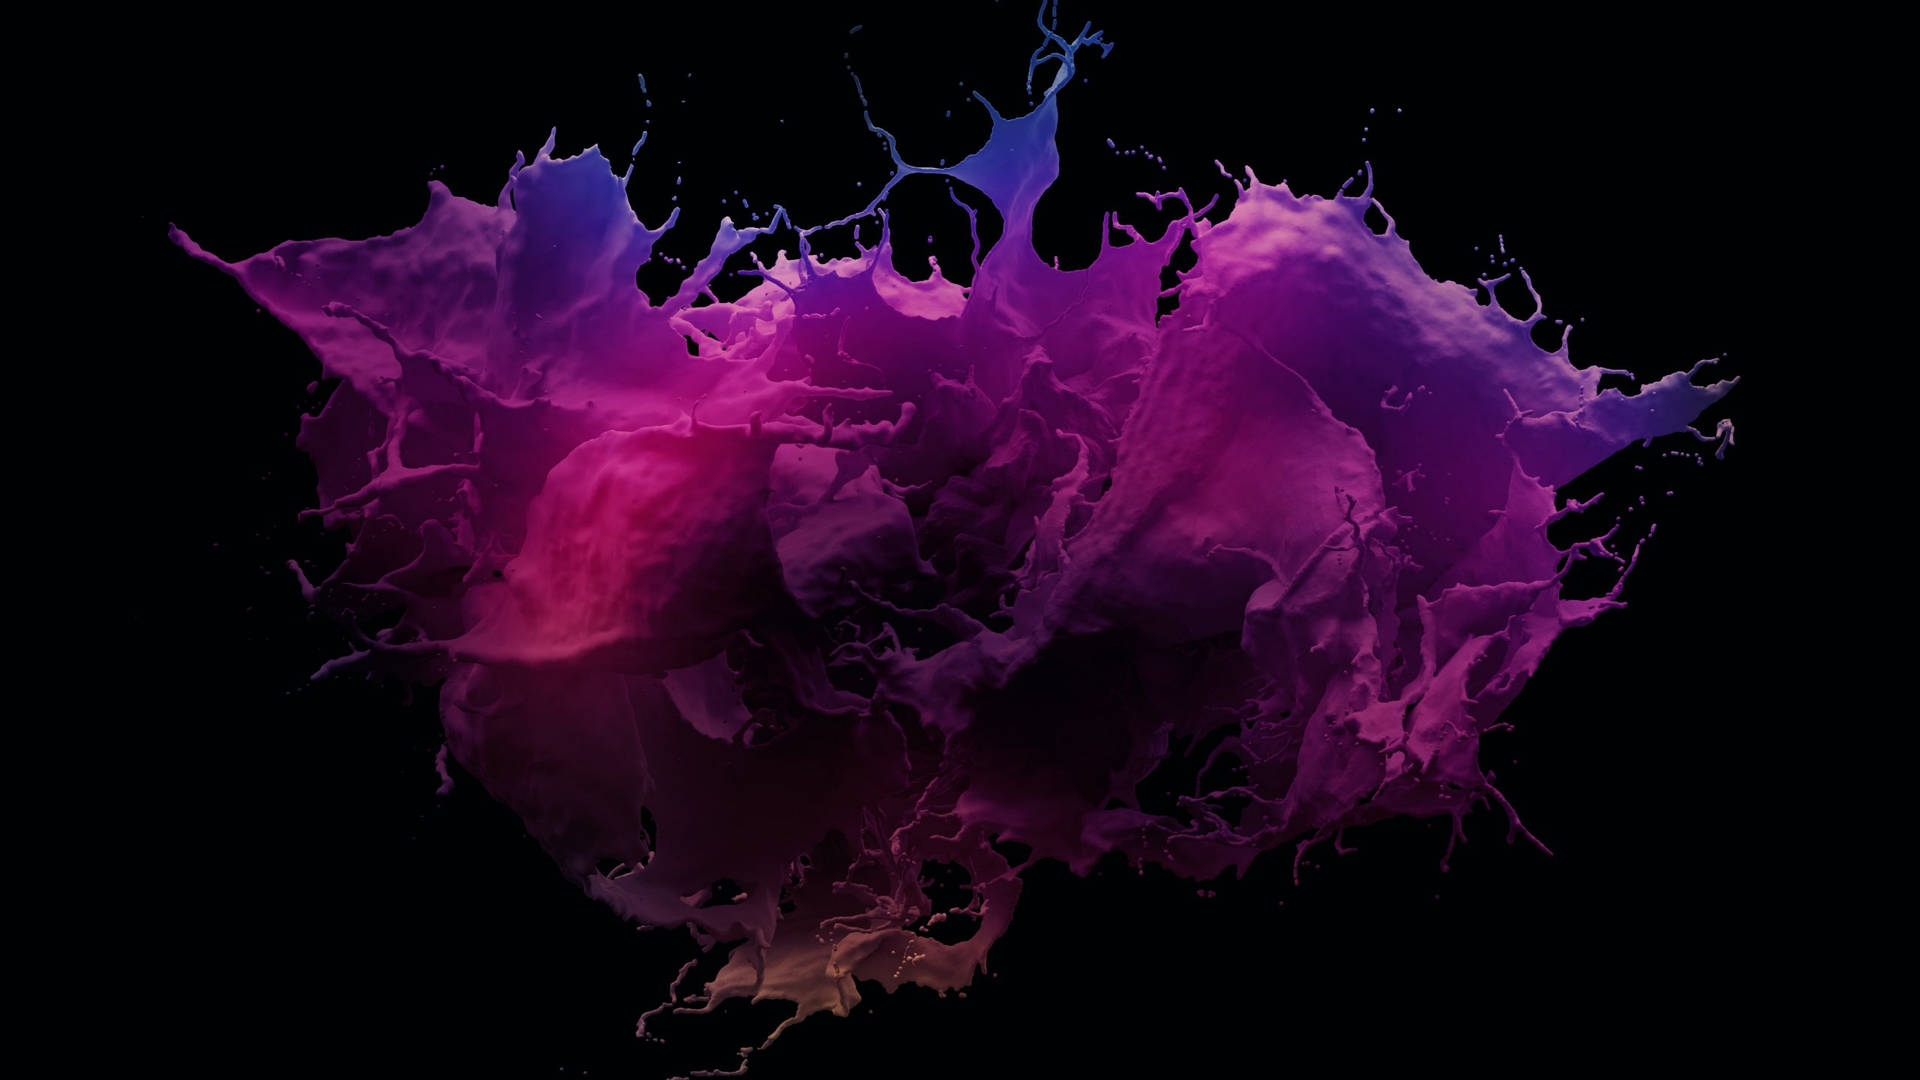 Violet Aesthetic Abstract Art Paintbrush Design Background